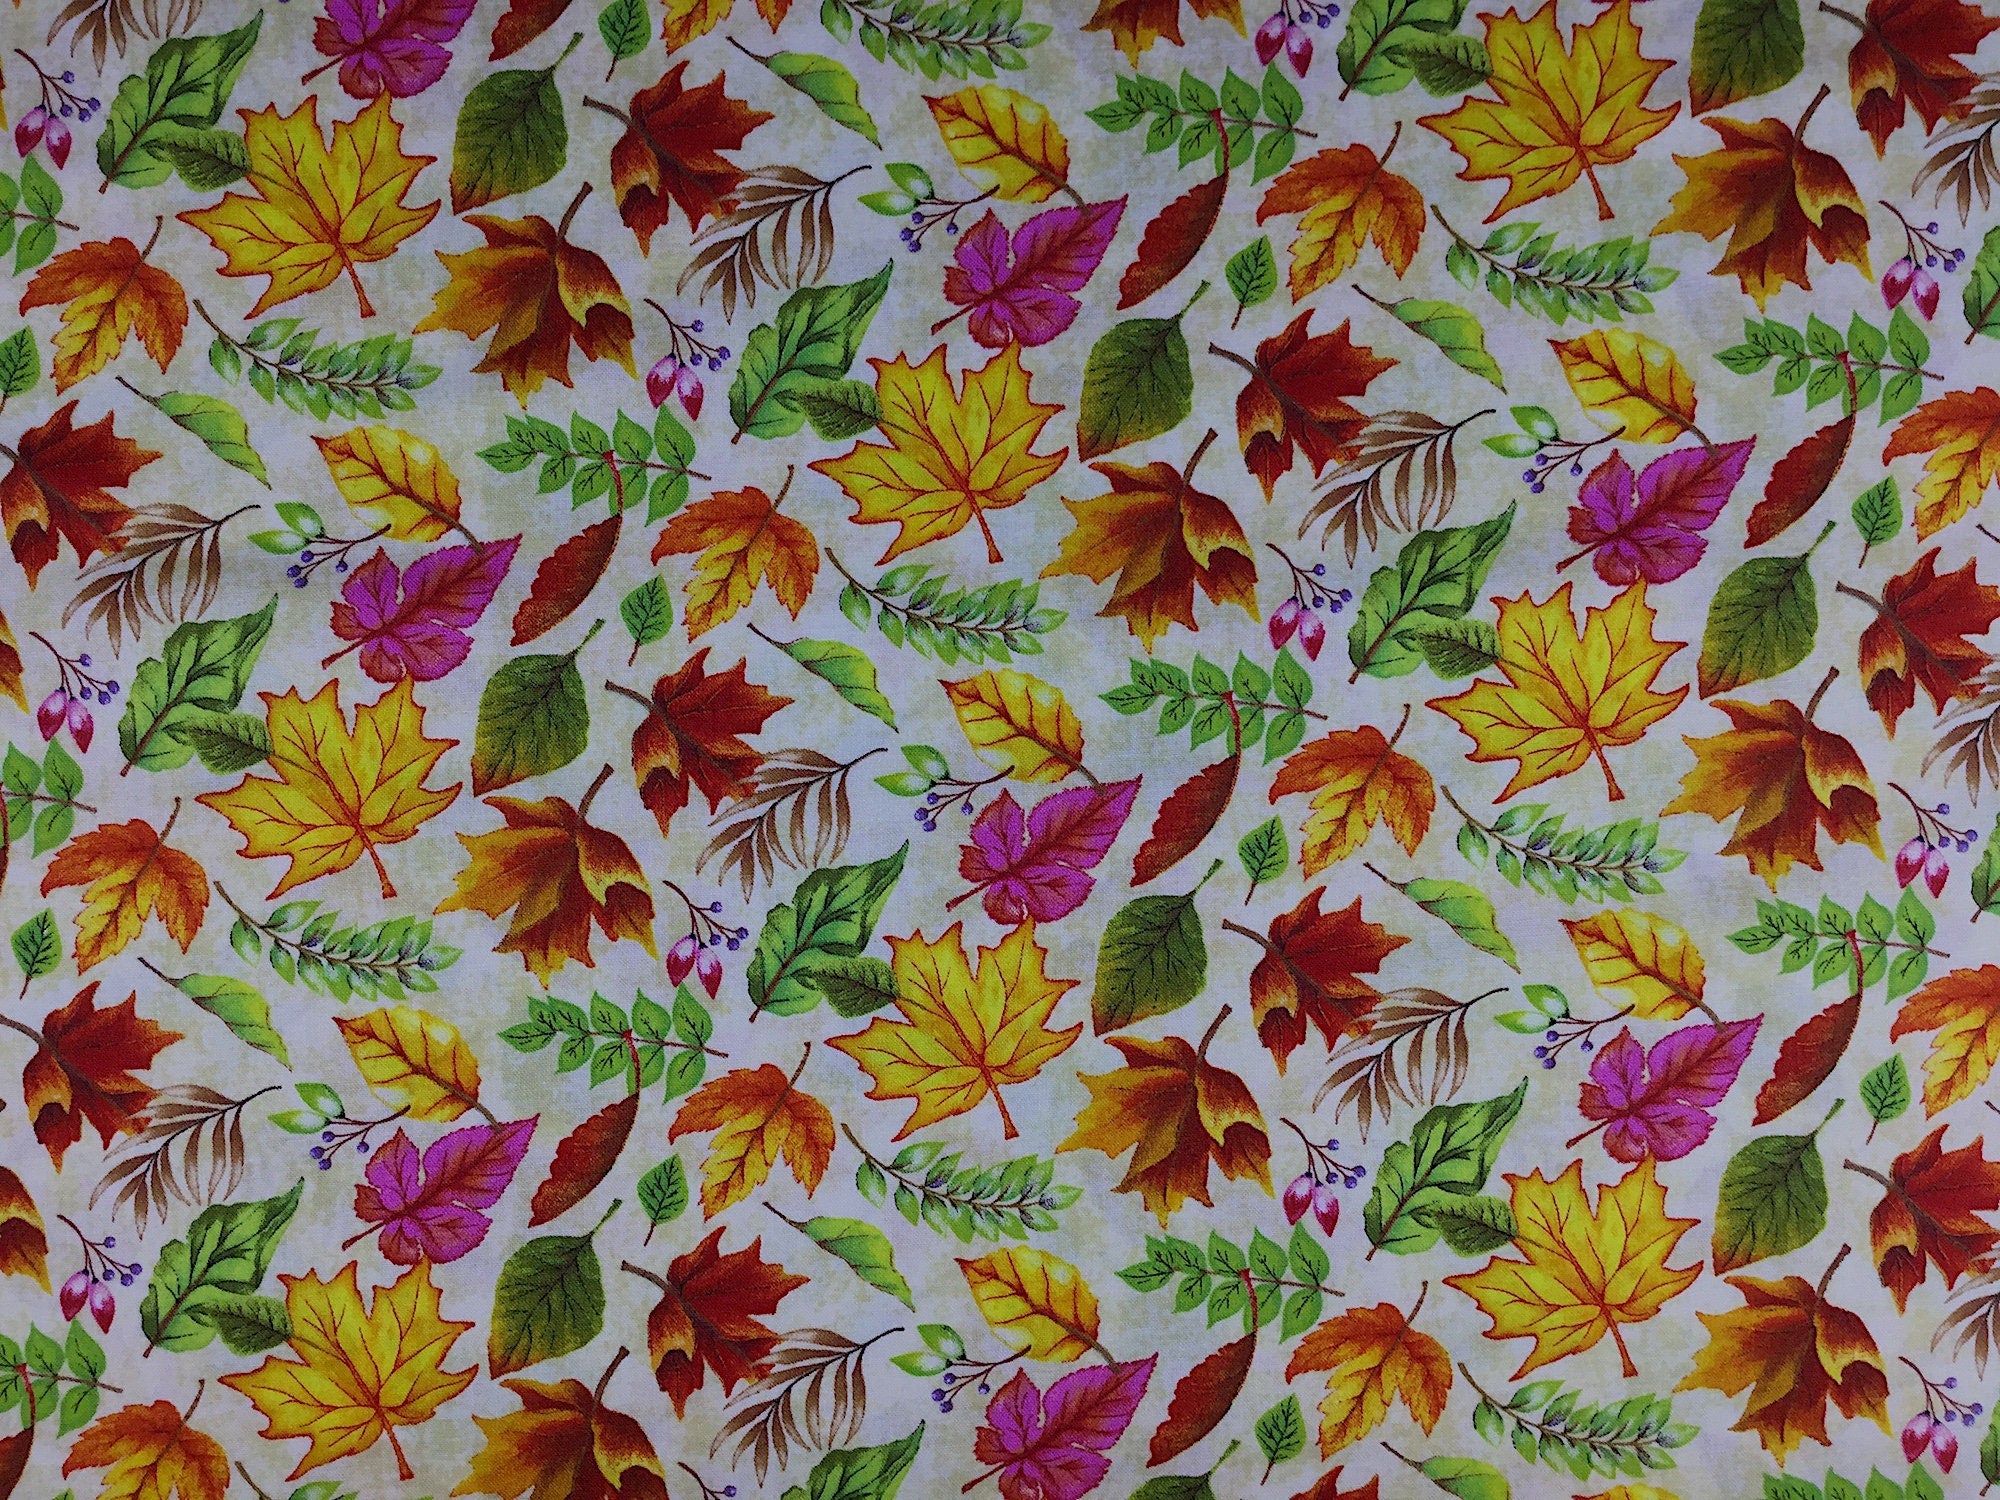 Fall Leaf Fabric - Gold-Yellow Tossed Leaves - Happy Gatherings - Fall Fabric - Quilting Fabric - Cotton Fabric -FALL-14